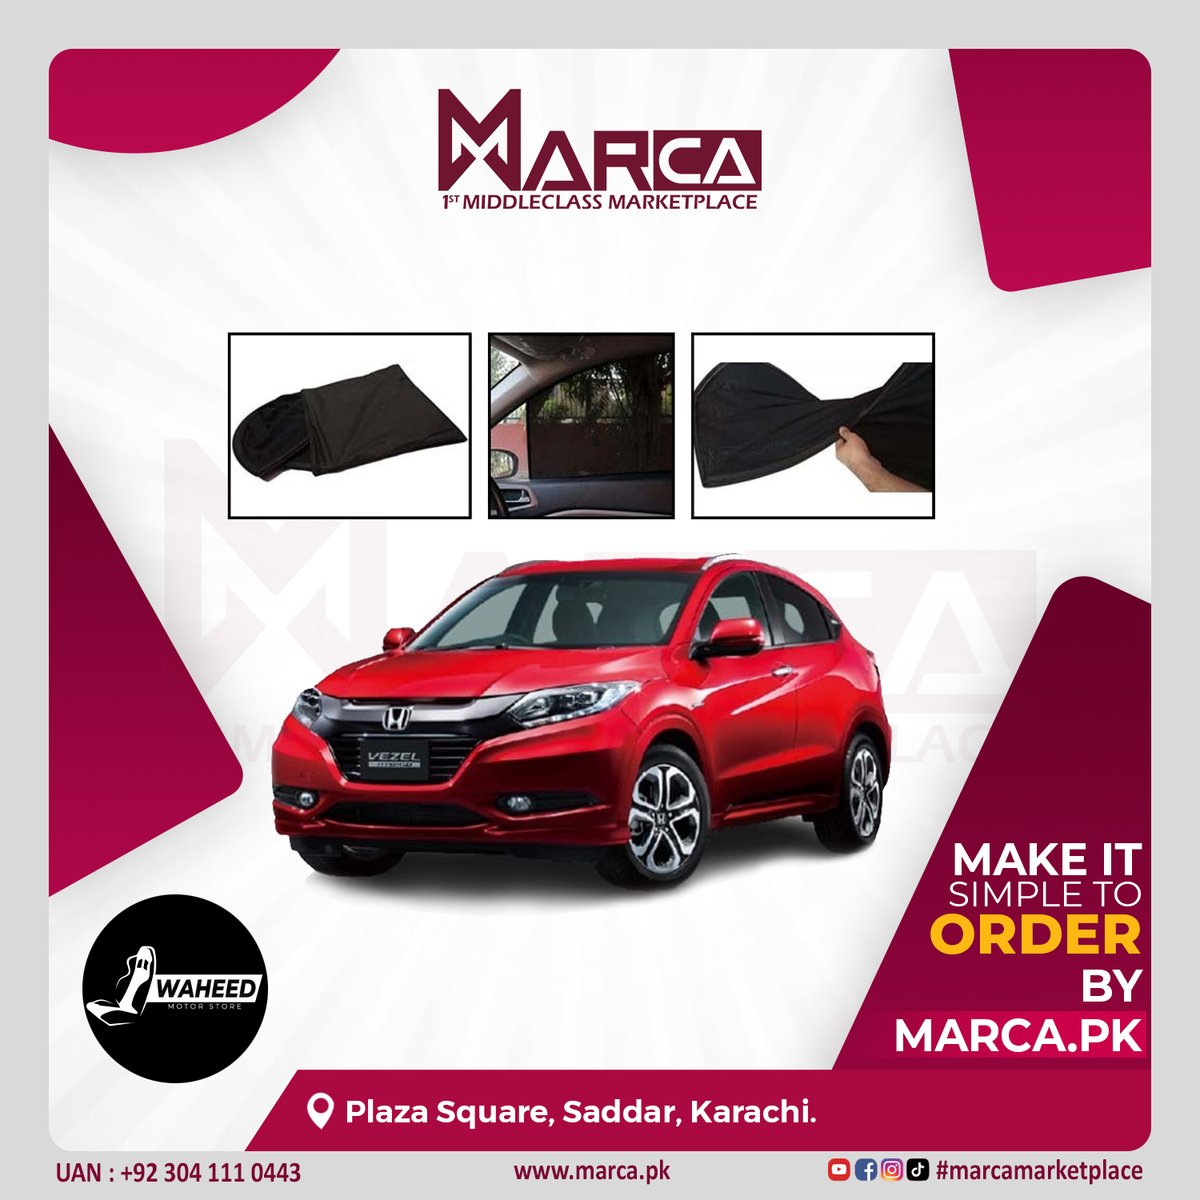 Waheed Motors Can Help Your Vehicle Operate Better.
Order From Marca marketplace
virtual.marca.pk/shop/Waheed-Mo…
.
.
.
.
#carcamera #backcamera #carcharger #microfibercloth #sunshades #automobile #chromekit #parachutecover #wiperblades #seatcovers #vehicleaccessories #carmatting #carlove